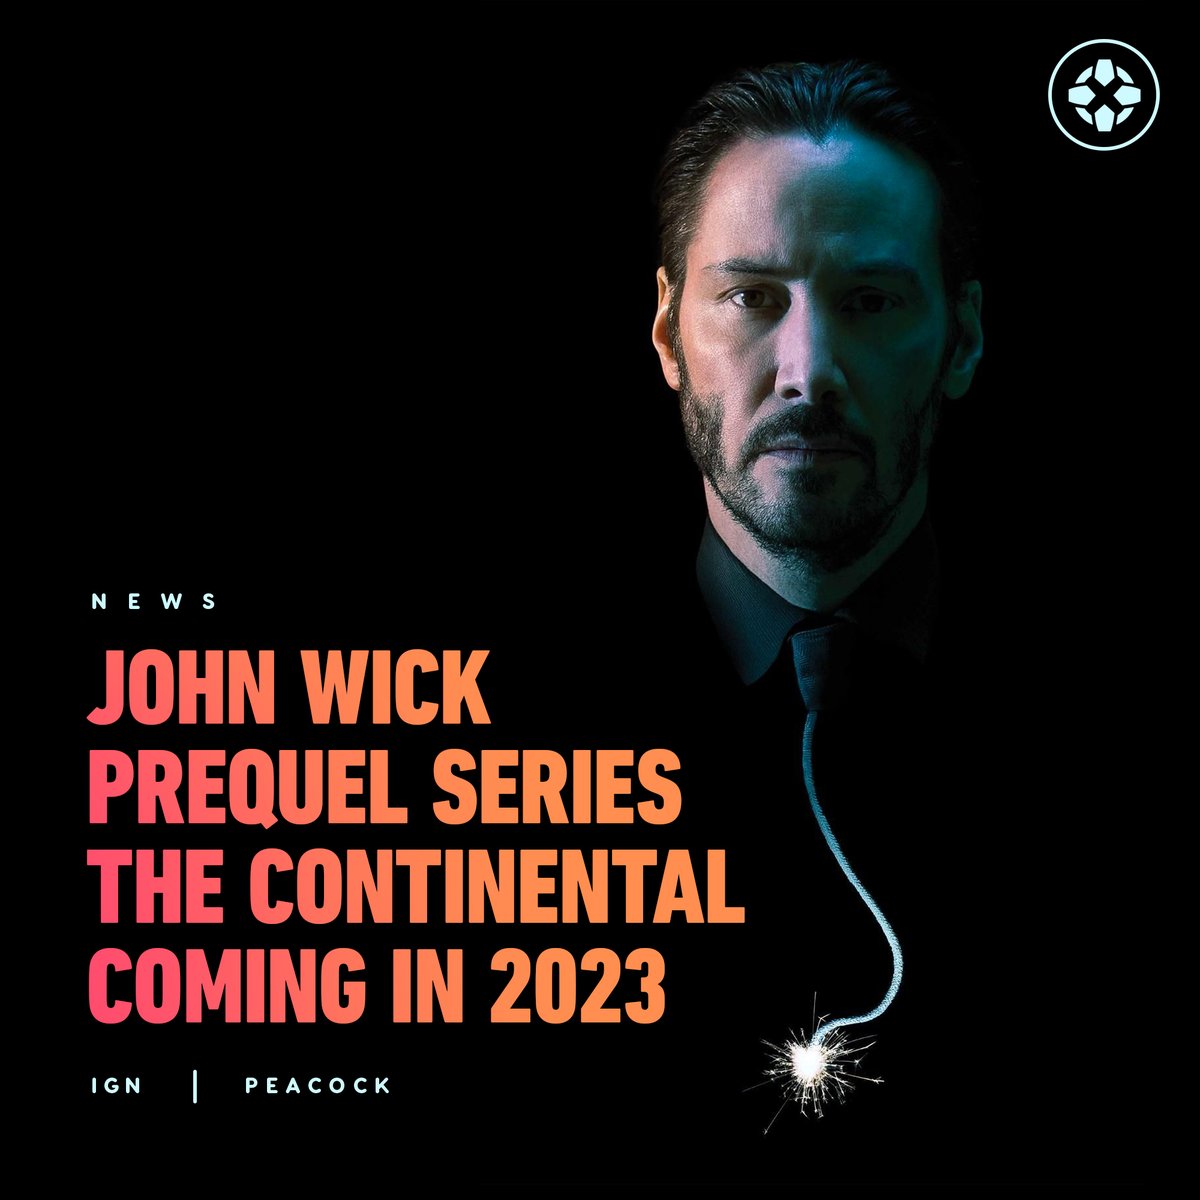 John Wick prequel show set to debut on Peacock in 2023 - Polygon